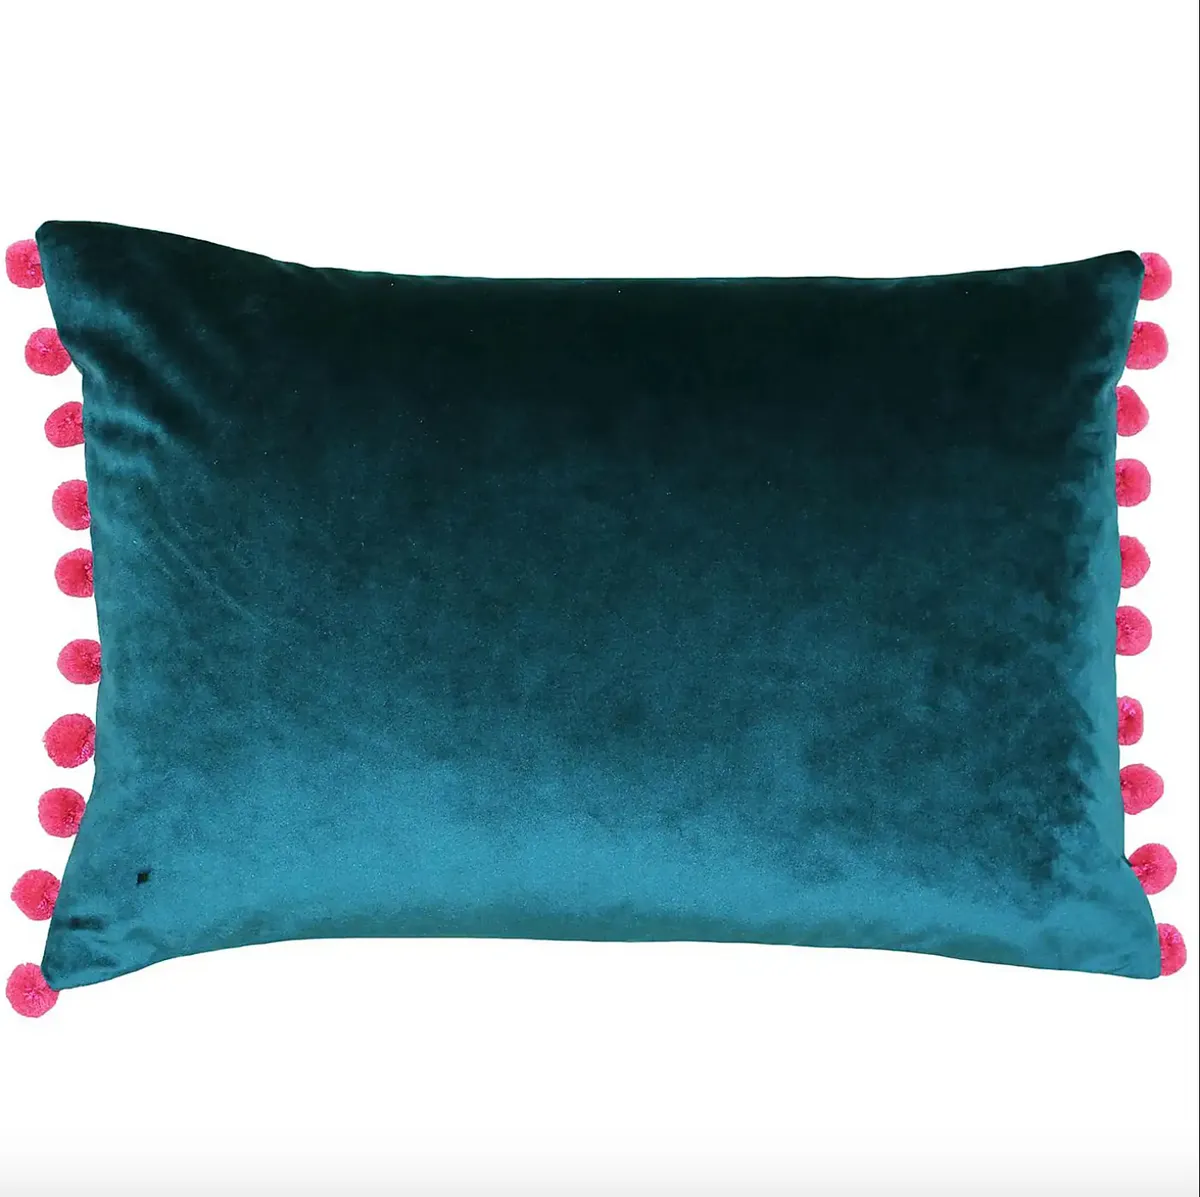 Teal and pink cushion